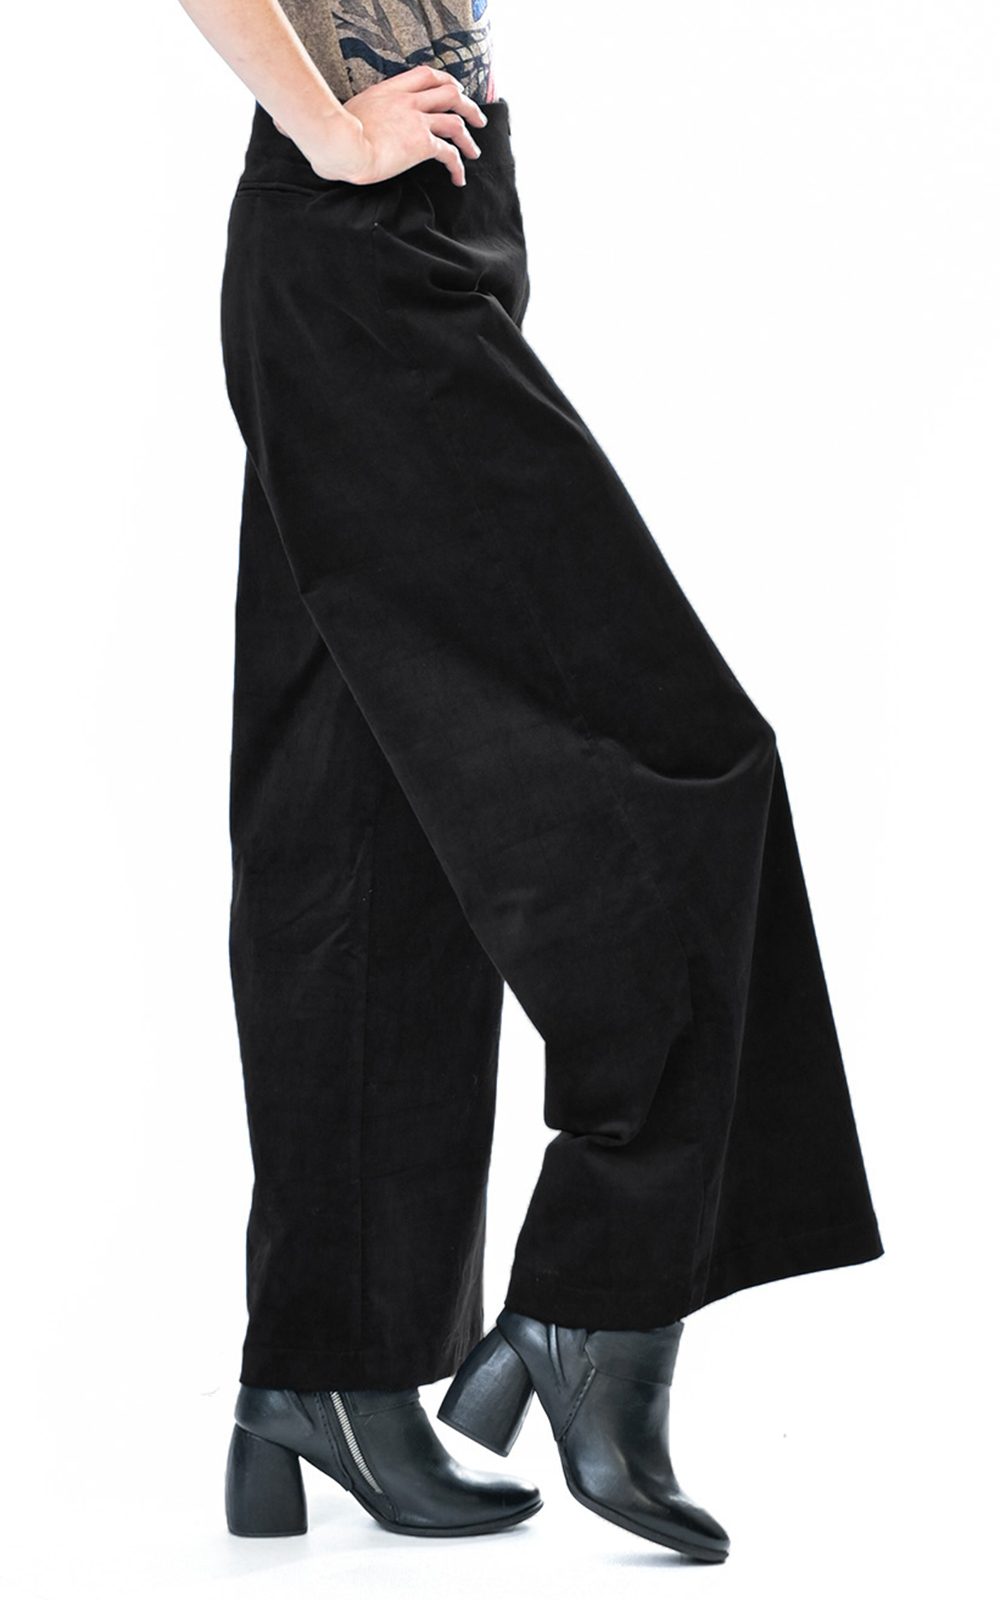 Theo Zurich Pant product photo.